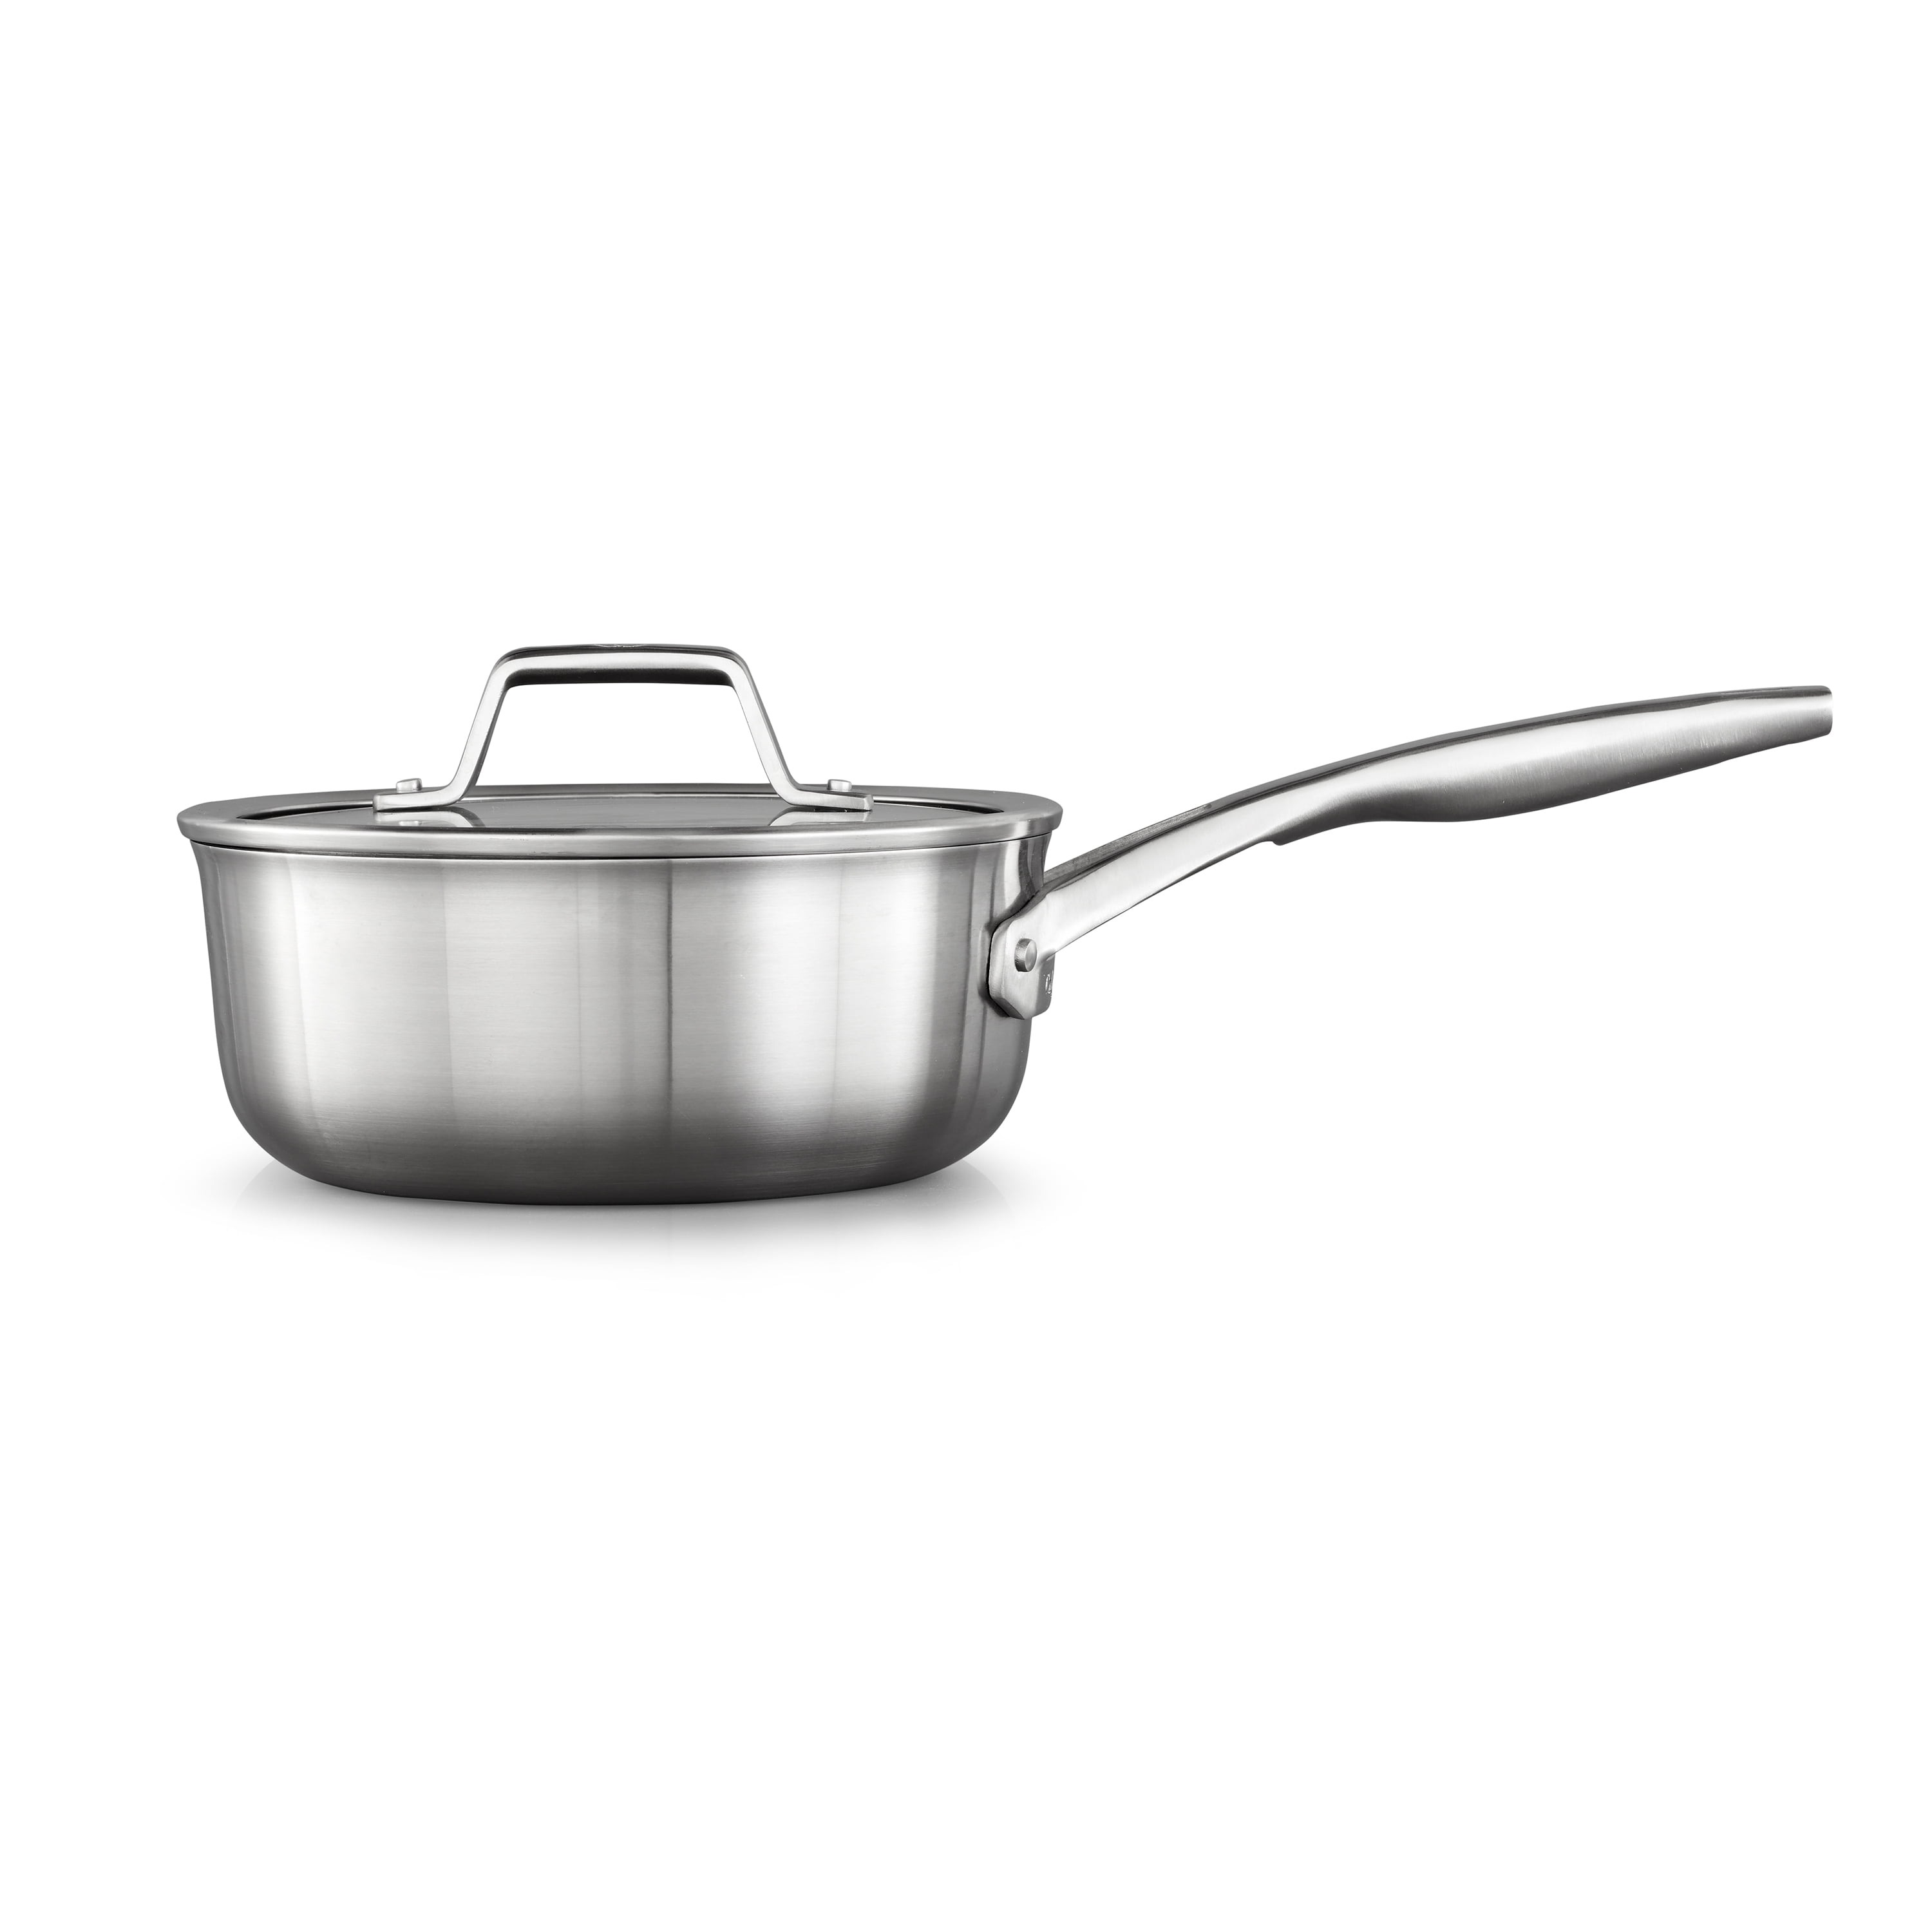 Calphalon Premier Stainless Steel Cookware, 6-Quart Stockpot with Cover